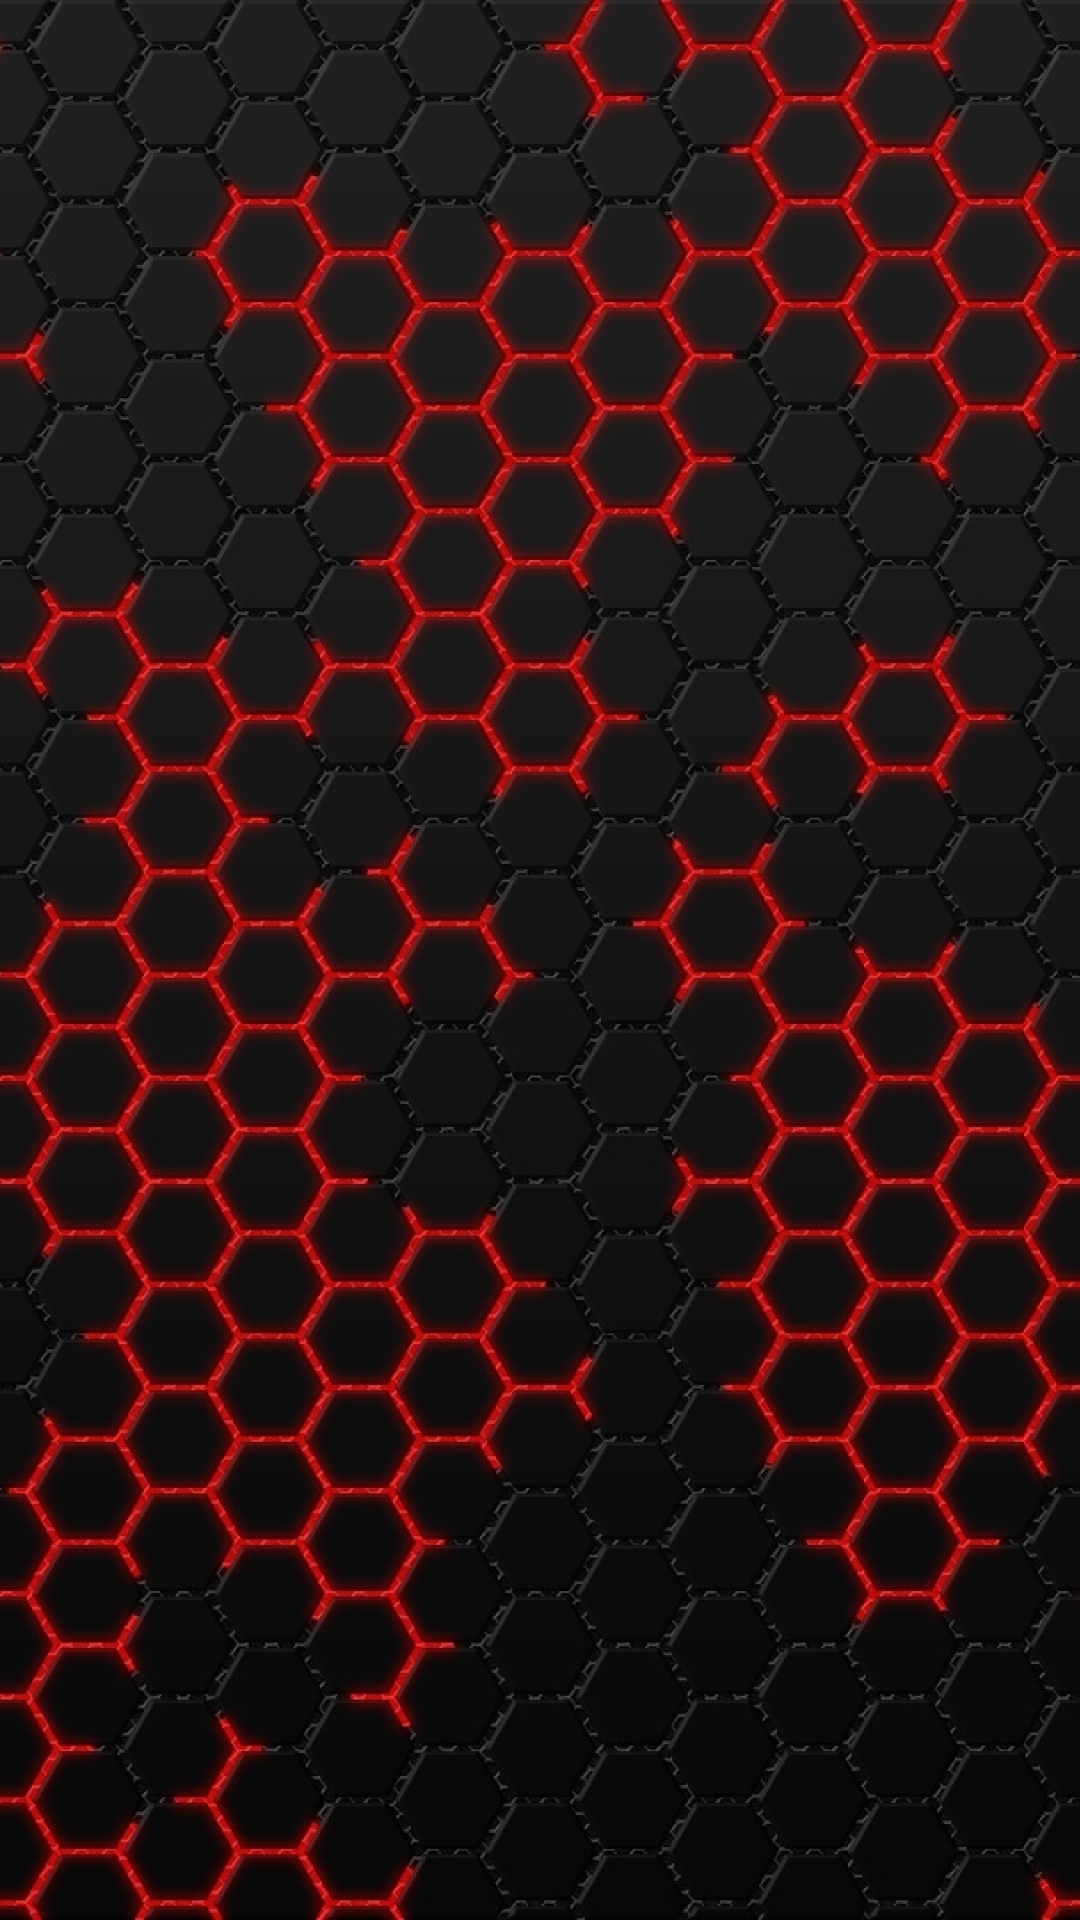 1080x1920 Black And Red Hexagon Iphone 7 6s 6 Plus And Pixel Xl One